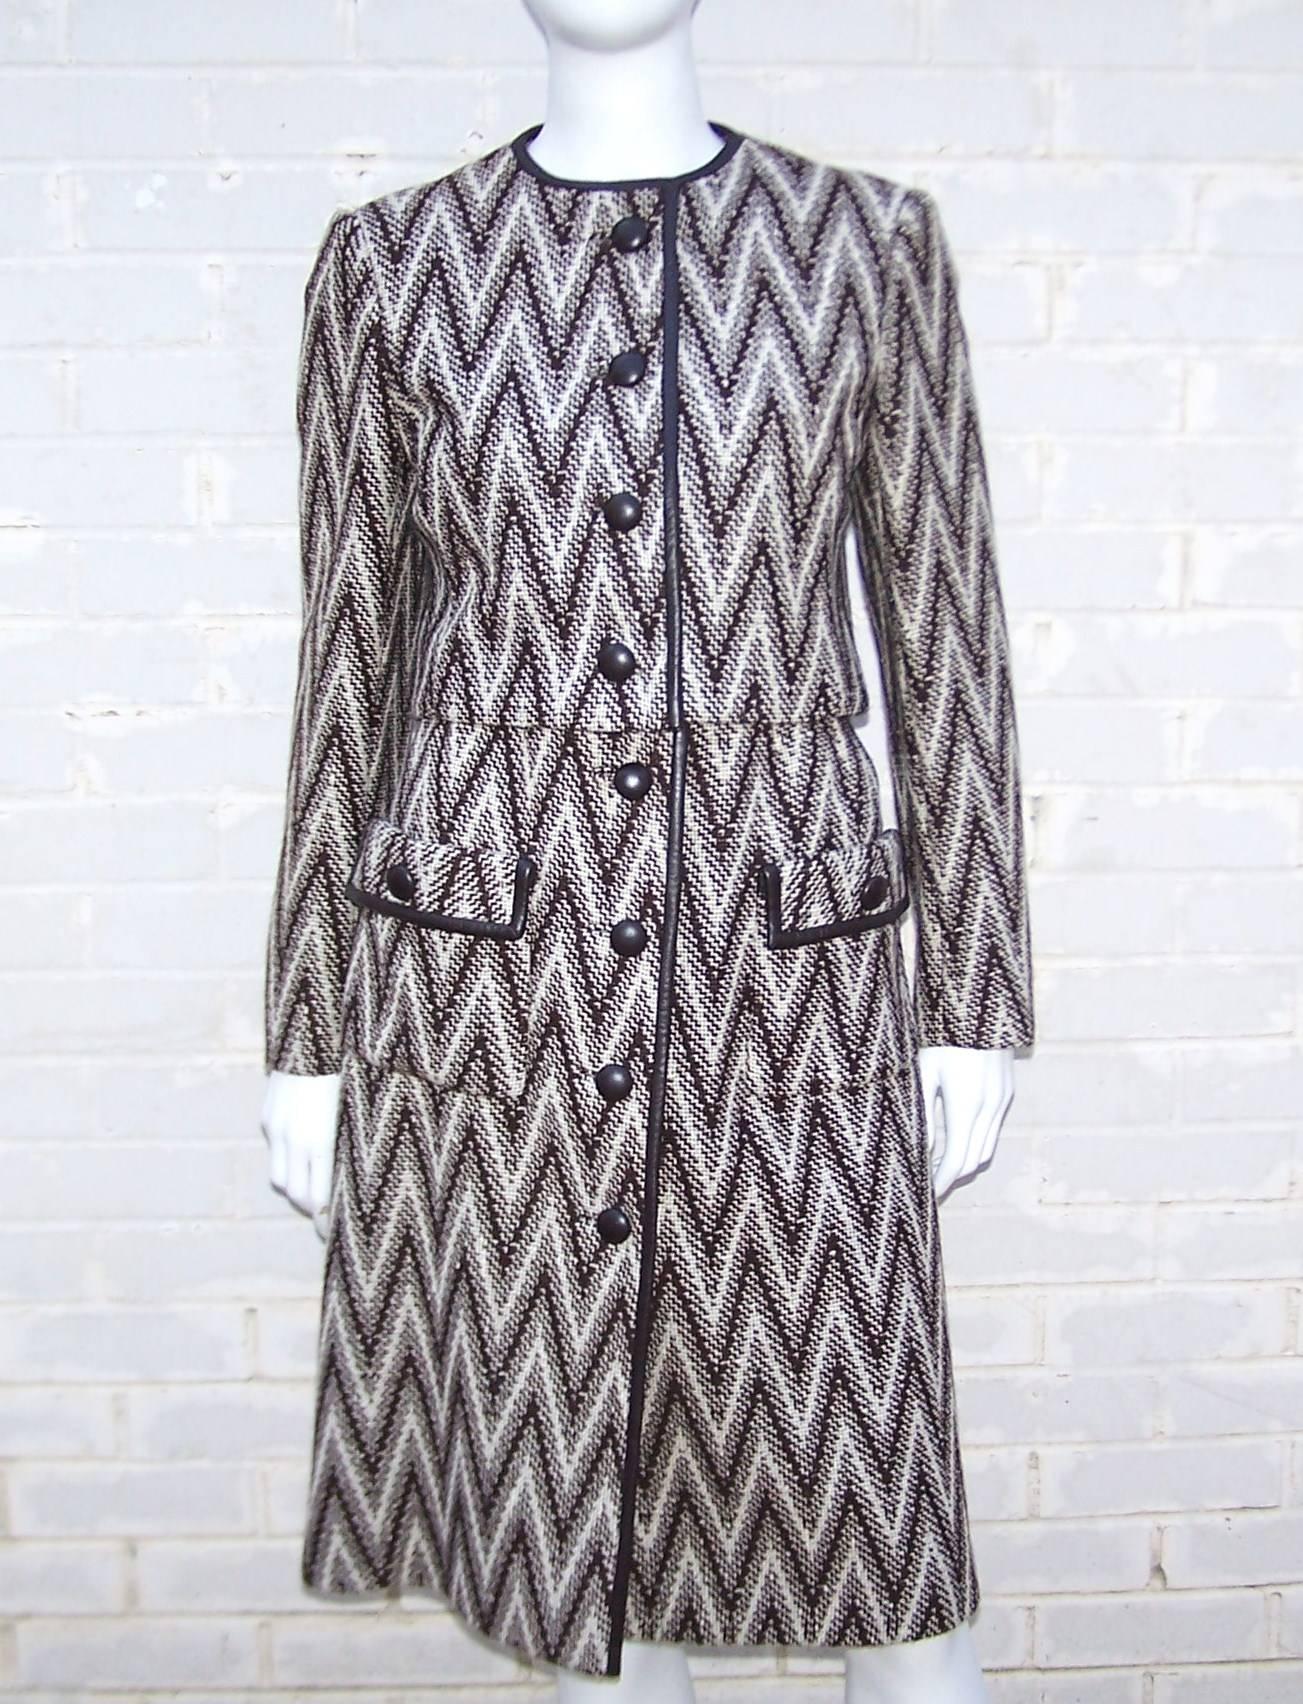 Gloria Sachs started her career as a textile designer creating fabrics for companies like Knoll and Herman Miller.  The dark brown chevron tweed fabric used in this two piece Chanel style suit is a great example of her textile design skills at work.